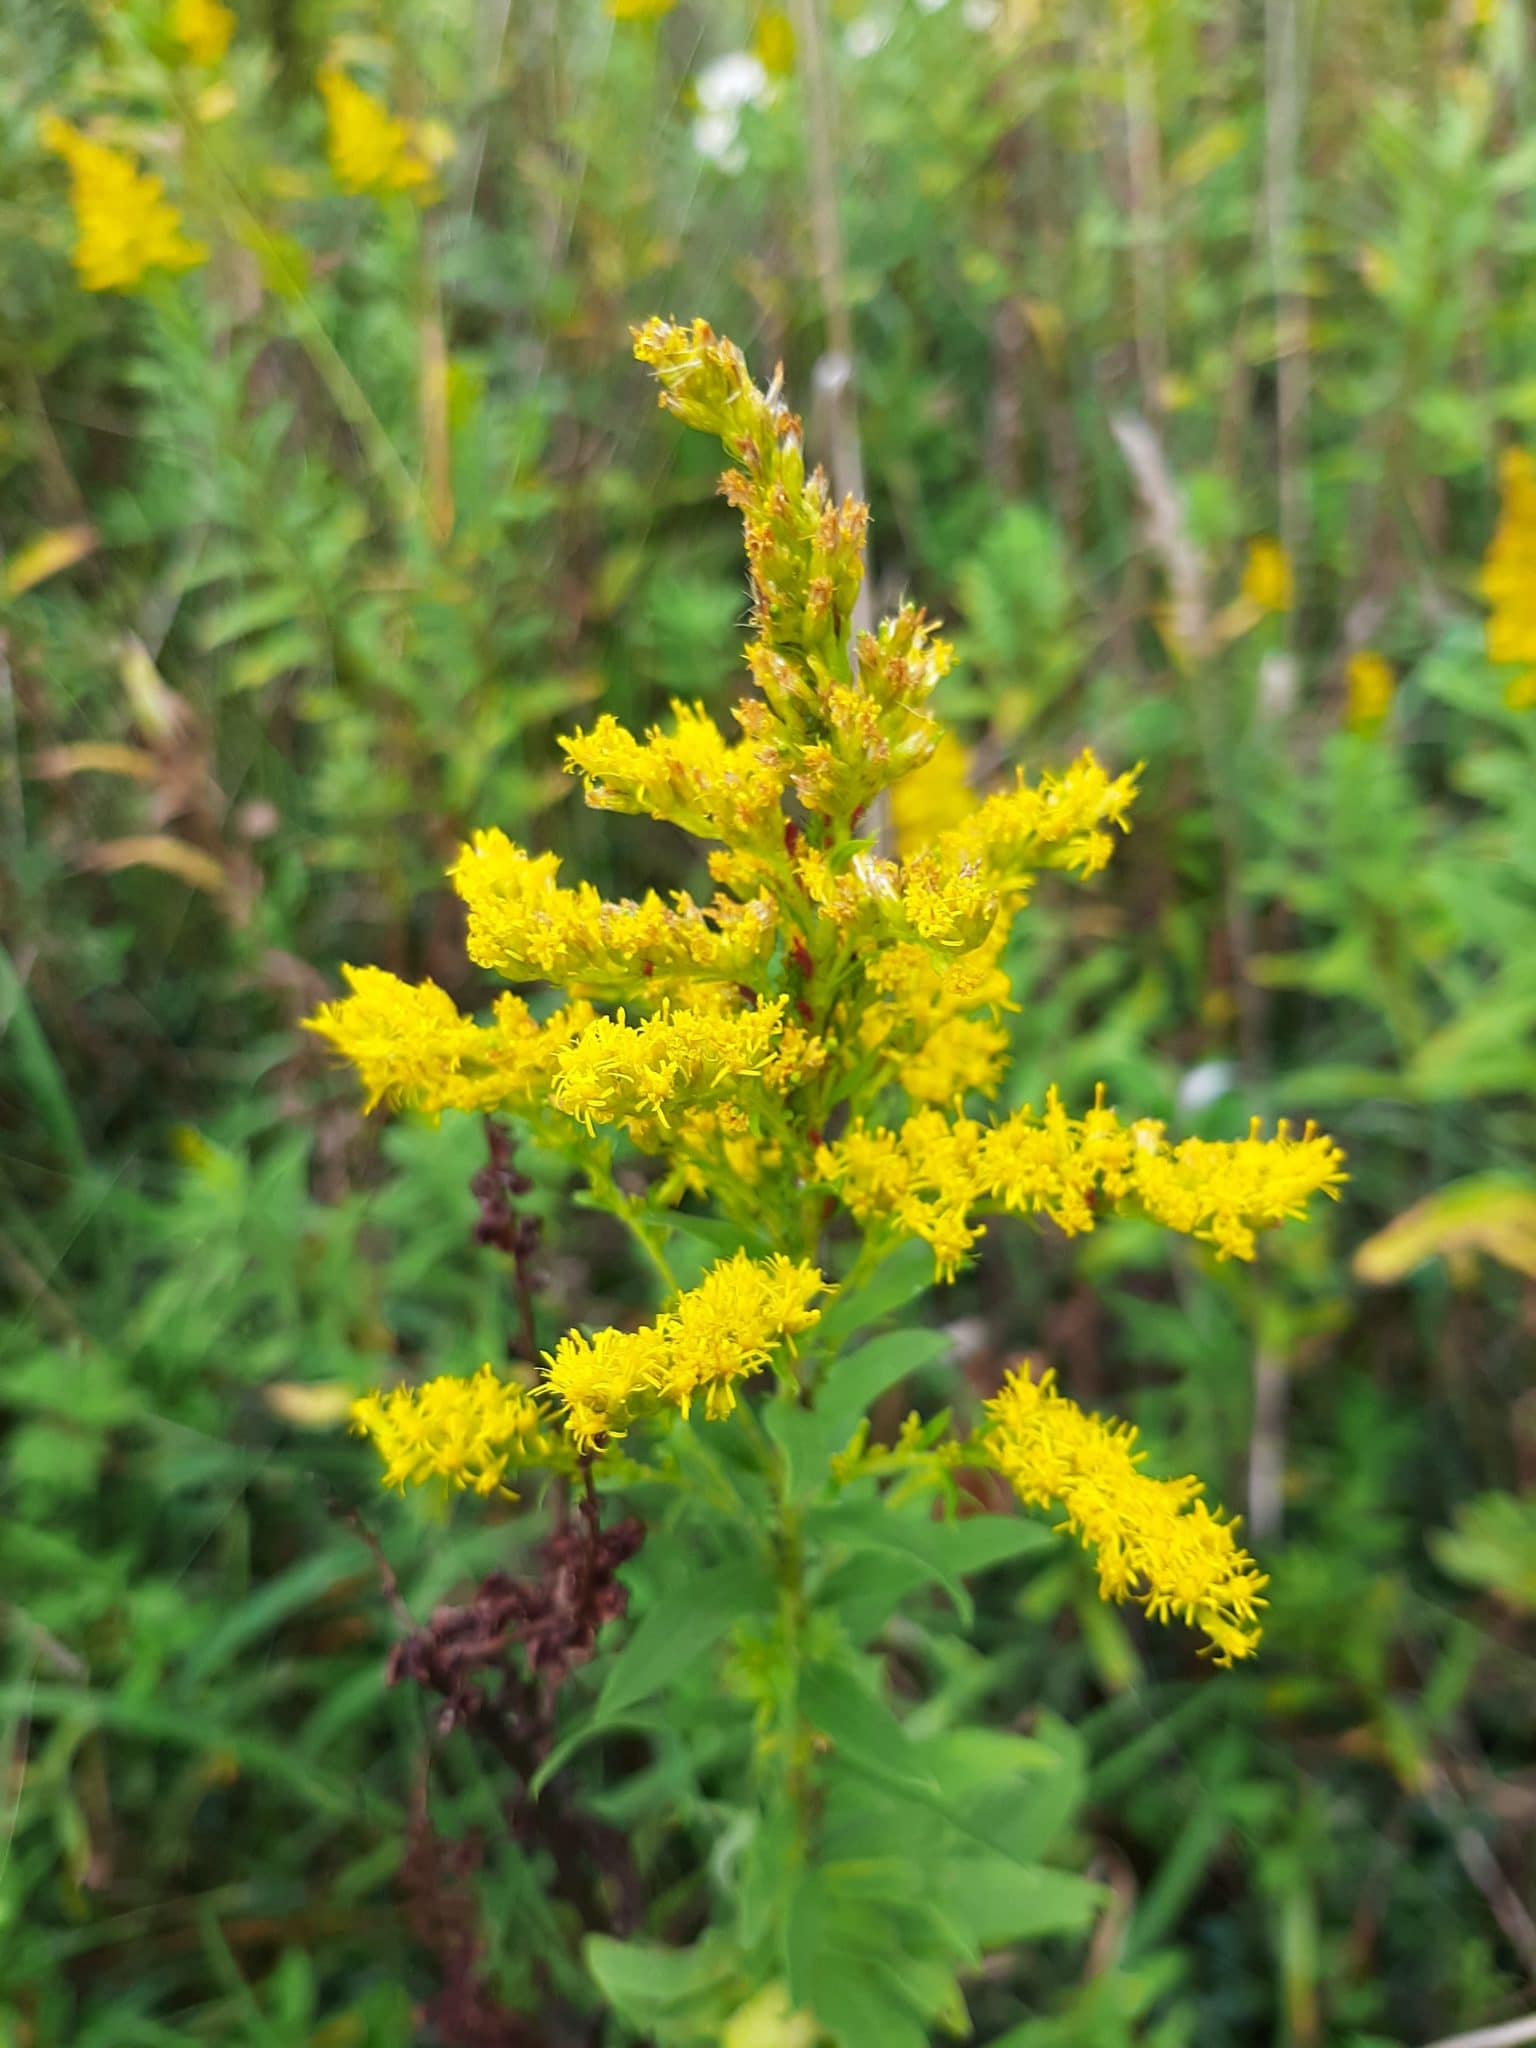 An image of Goldenrod